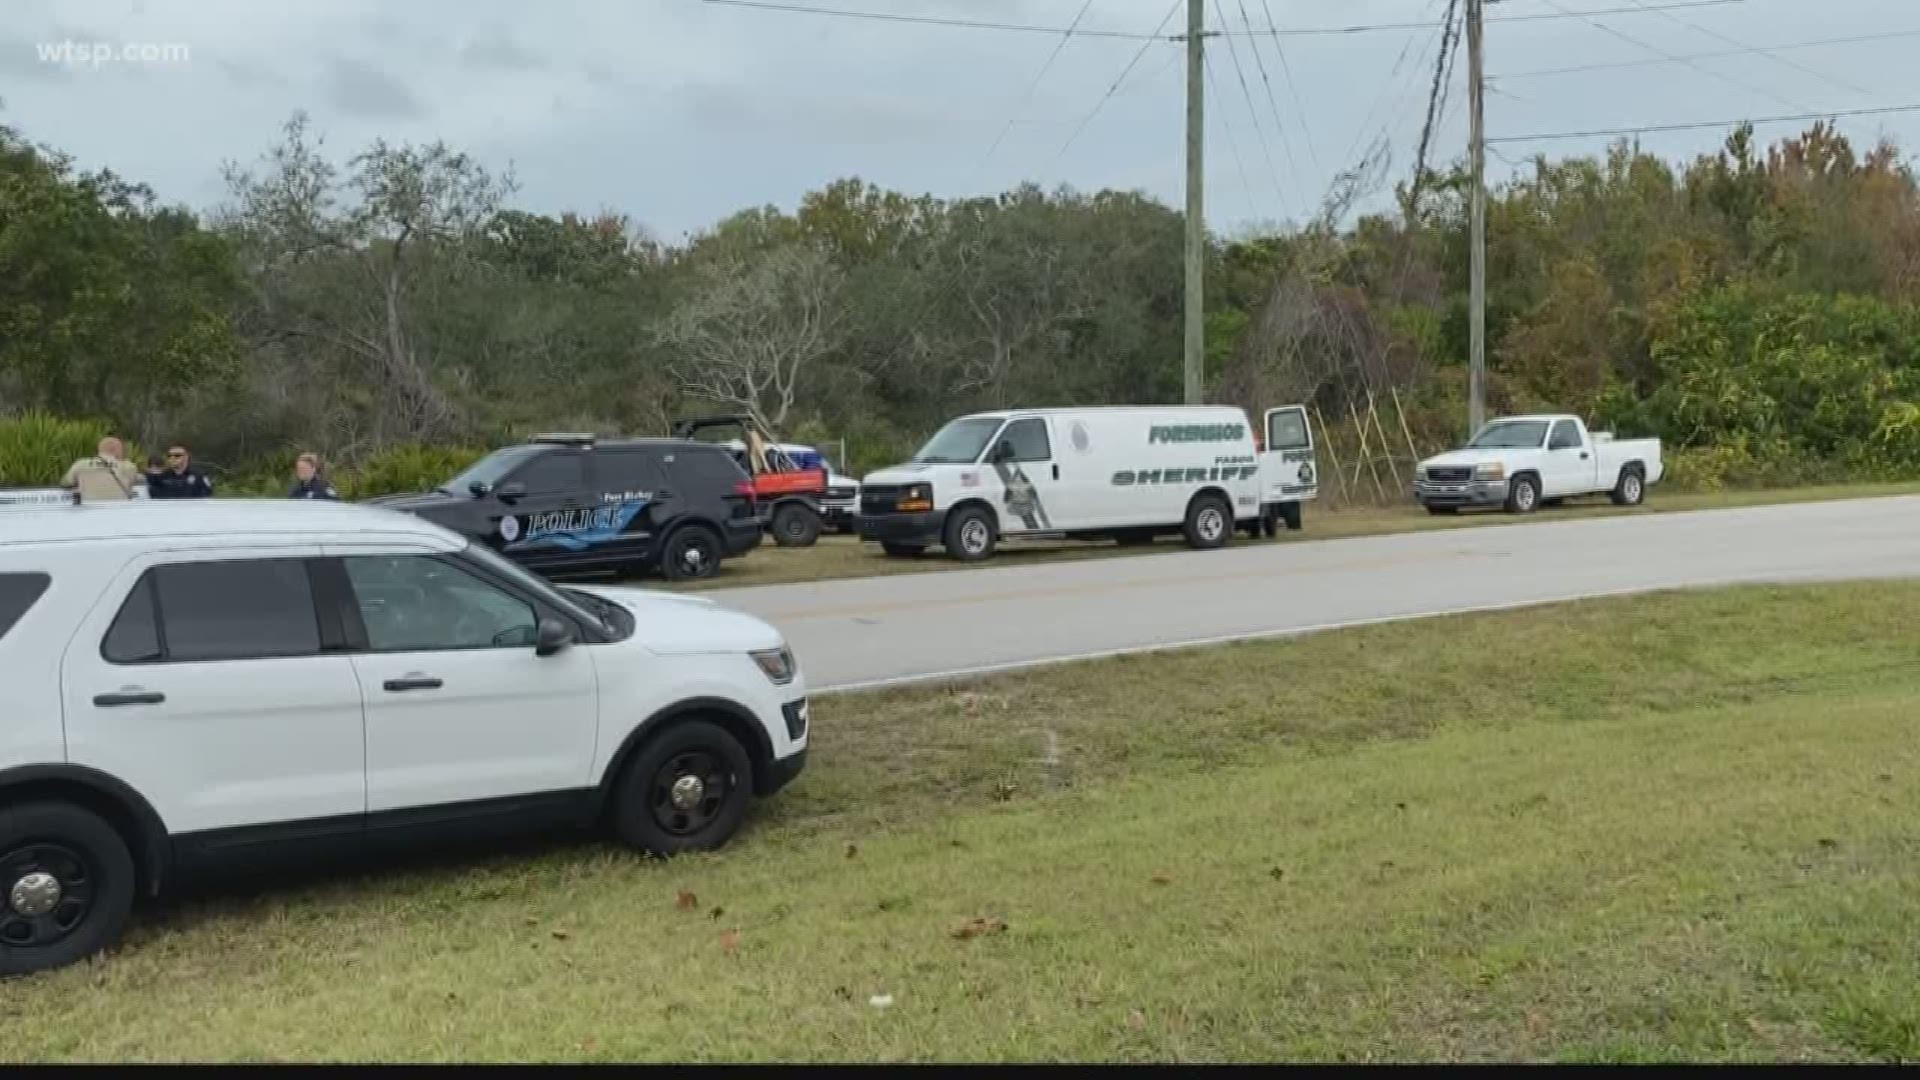 The Pasco County Sheriff's Office is investigating skeletal remains found in a state park in Port Richey.